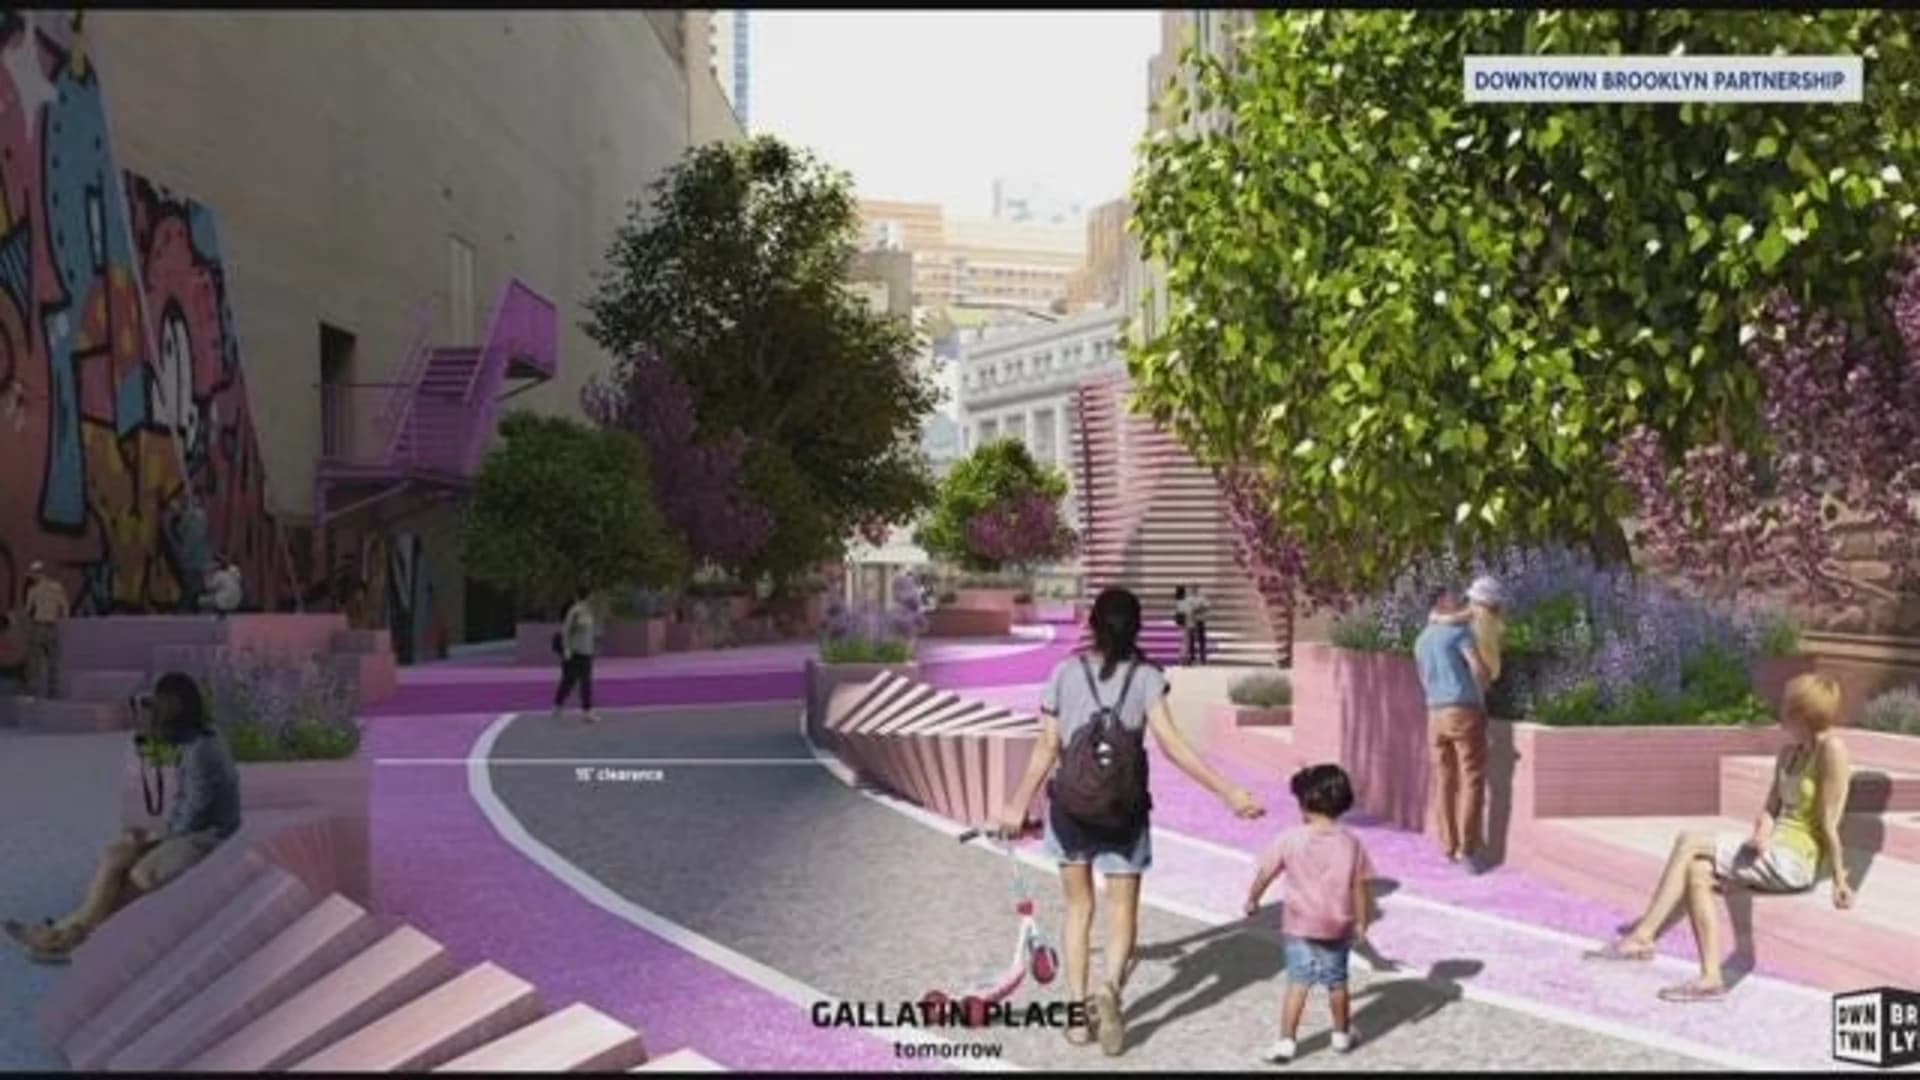 Urban designers partner to revitalize Downtown Brooklyn streets into pedestrian-friendly spaces